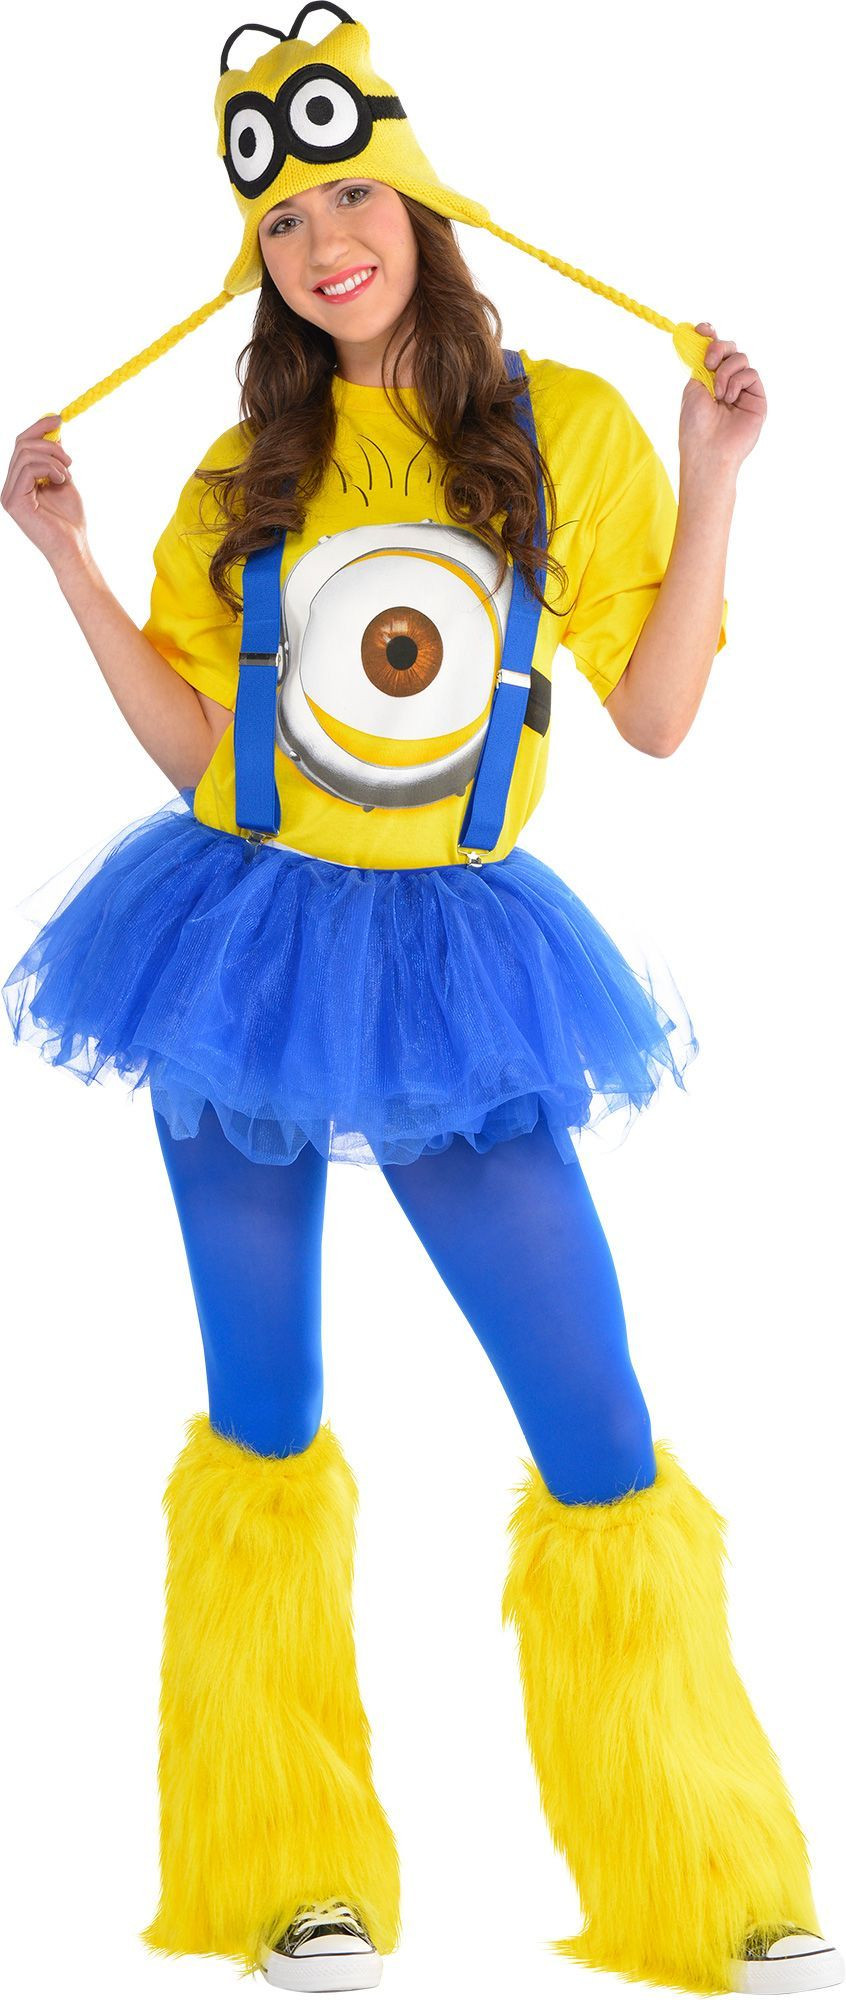 DIY Minion Costumes For Adults
 Make Your Costume Womens Minion 3